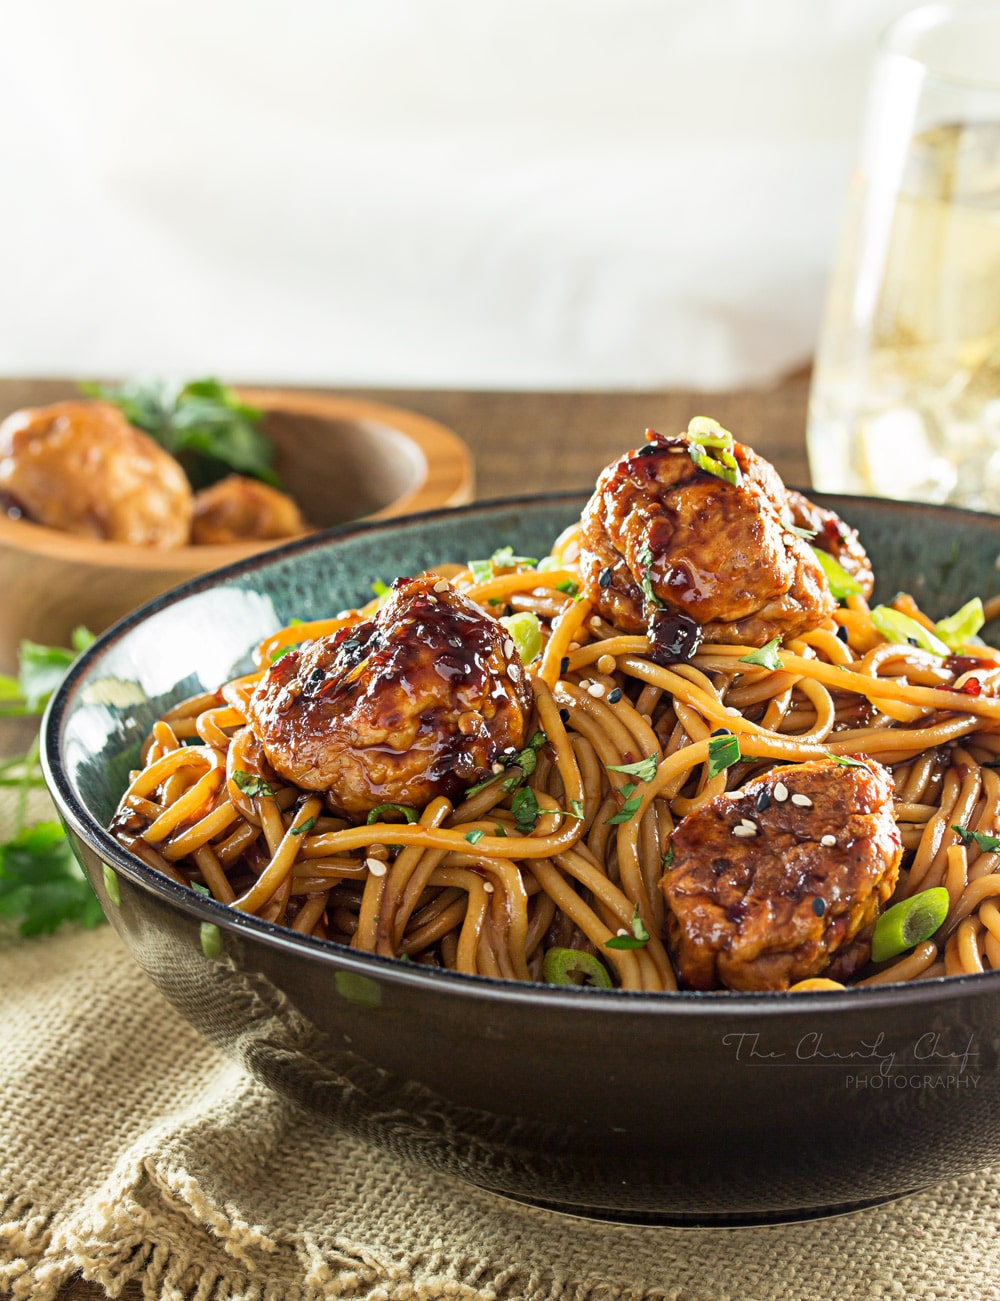 Kung-Pao-Chicken-Spaghetti-and-Meatballs | This version of Kung Pao chicken has all the flavors you'd expect from the classic dish, but in a comforting, homestyle spaghetti and meatballs package! | http://thechunkychef.com